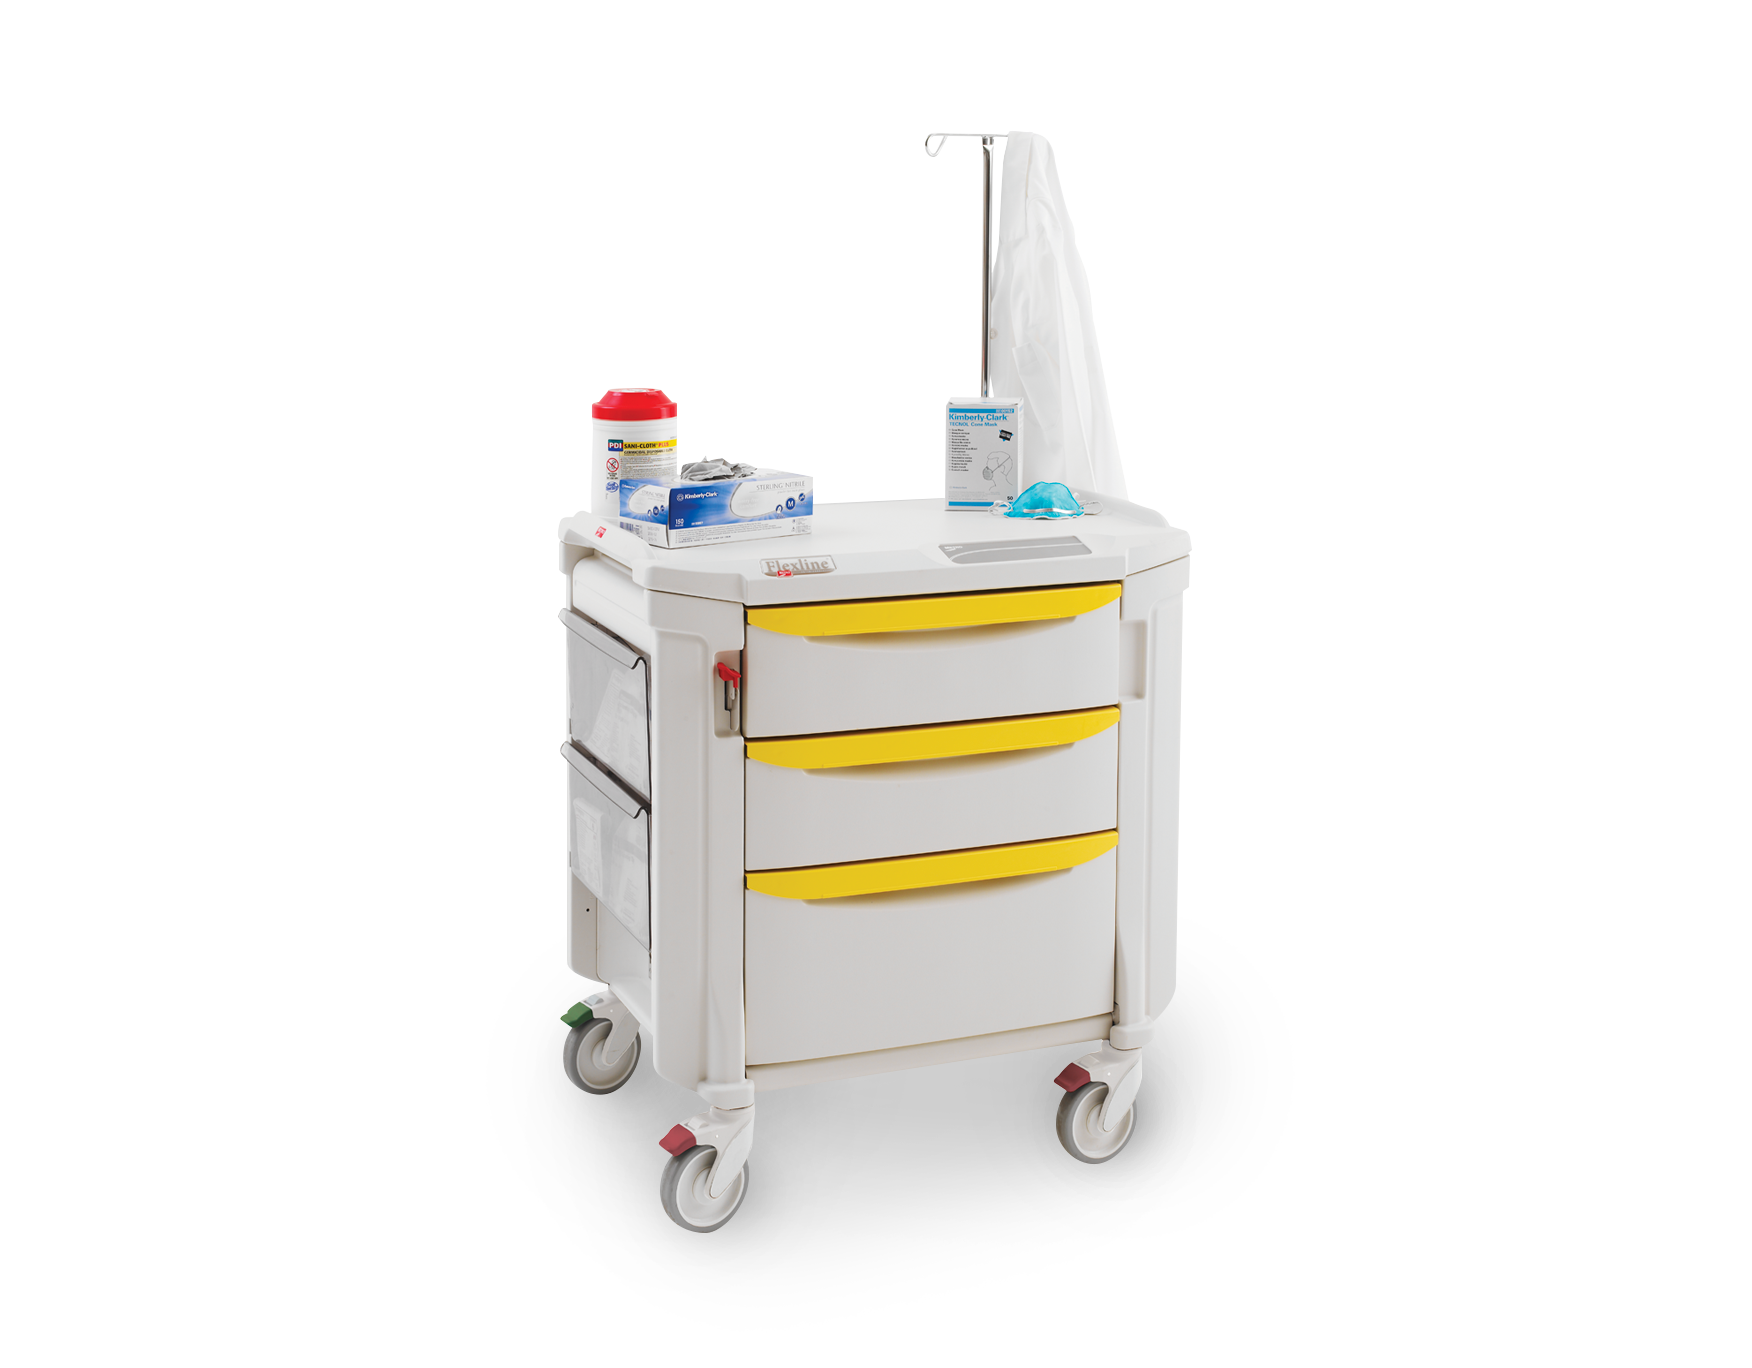 Isolation Carts for Hospitals